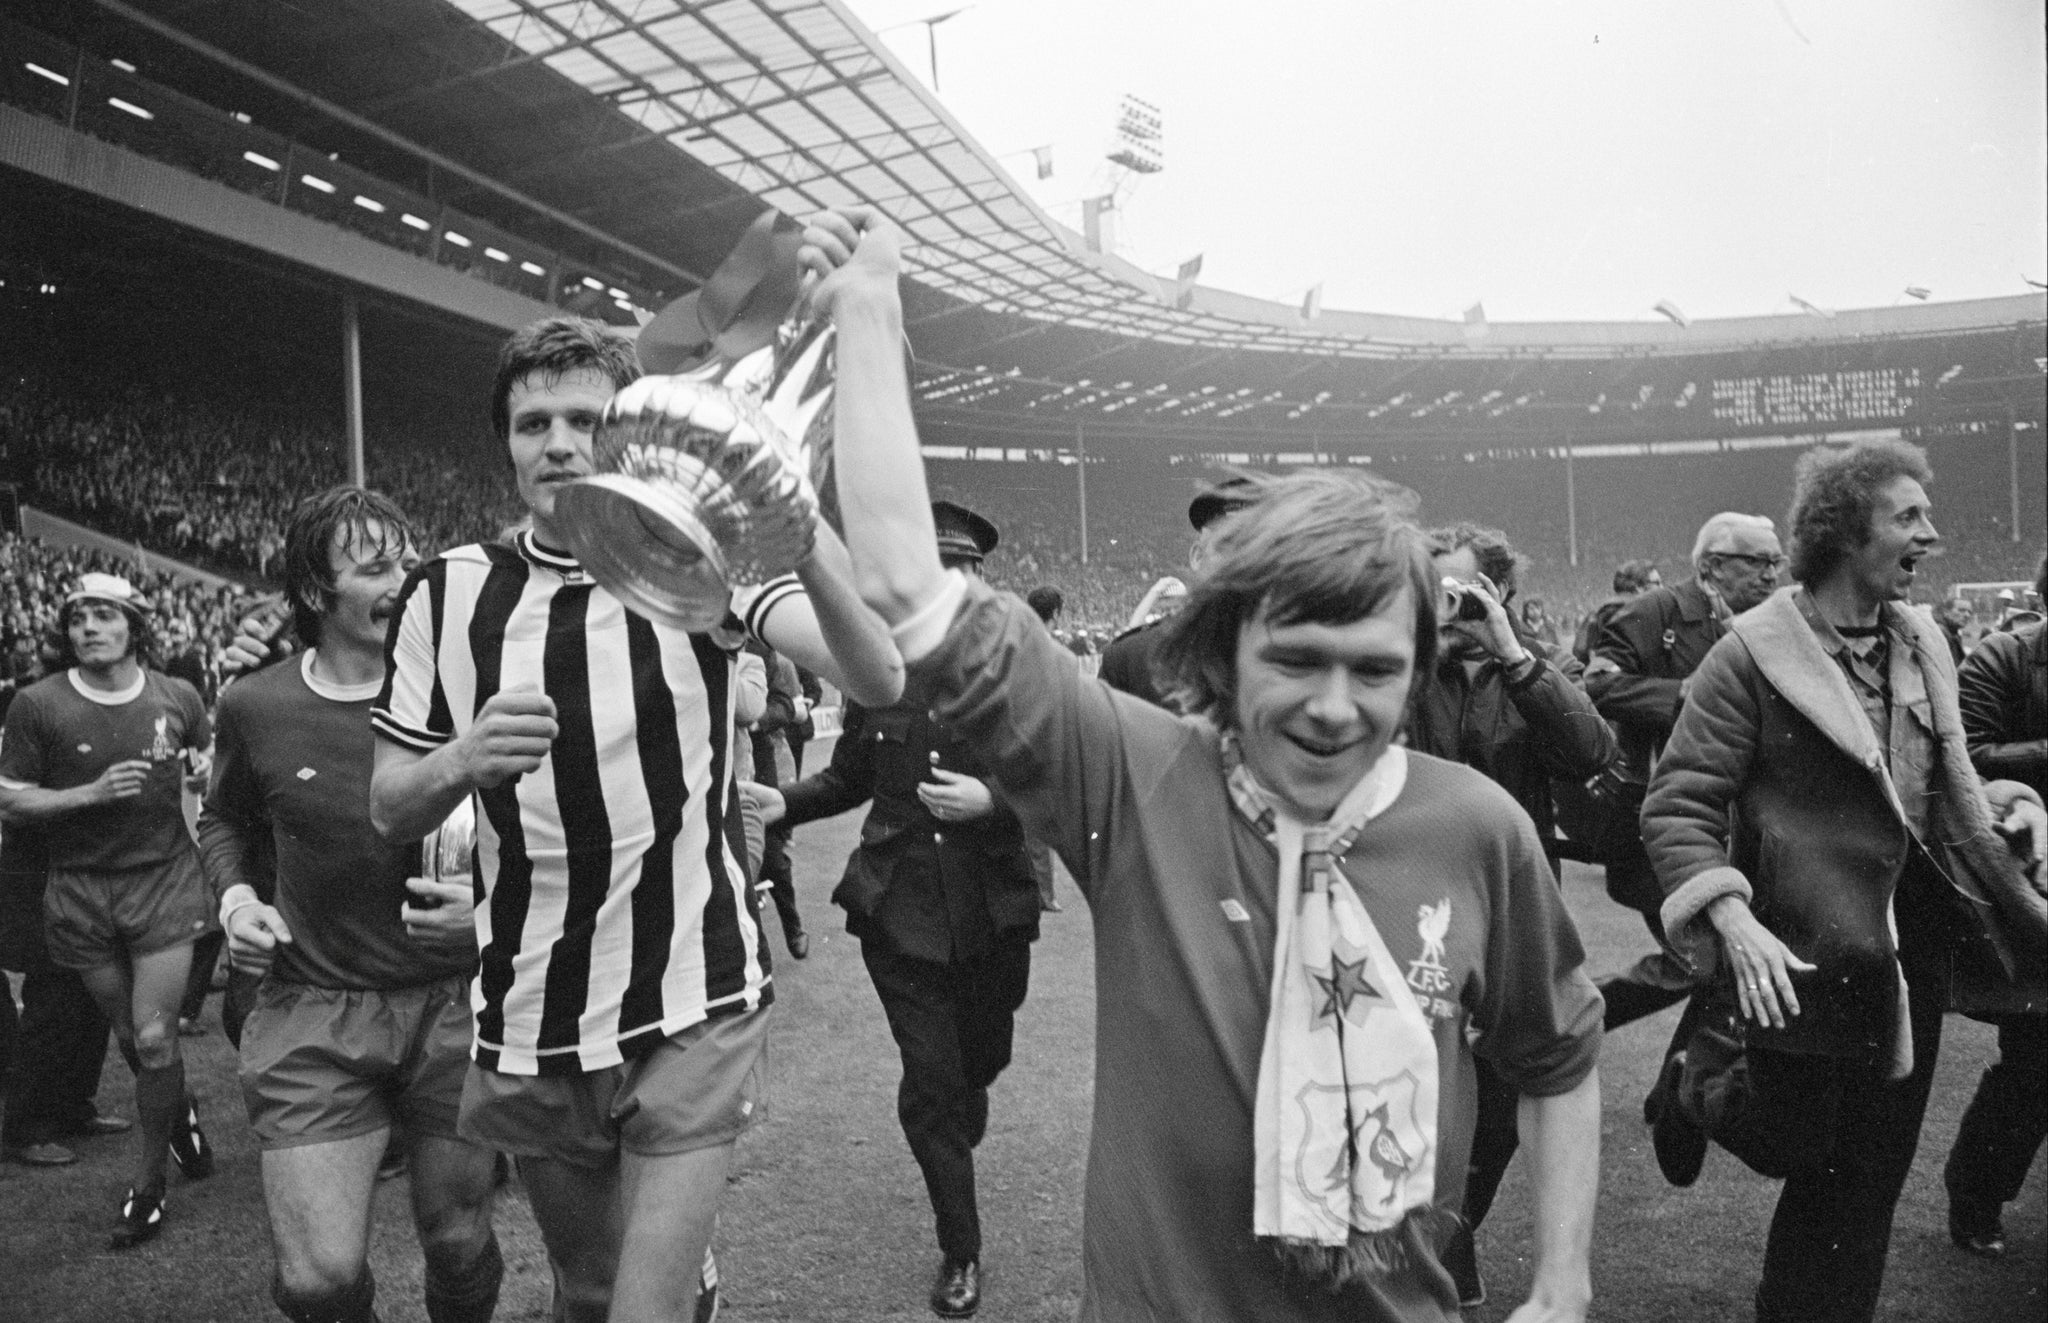 Liverpool players John Toshack (L) and Brian Hall (R) parade the winning trophy after the 1974 FA Cup Final